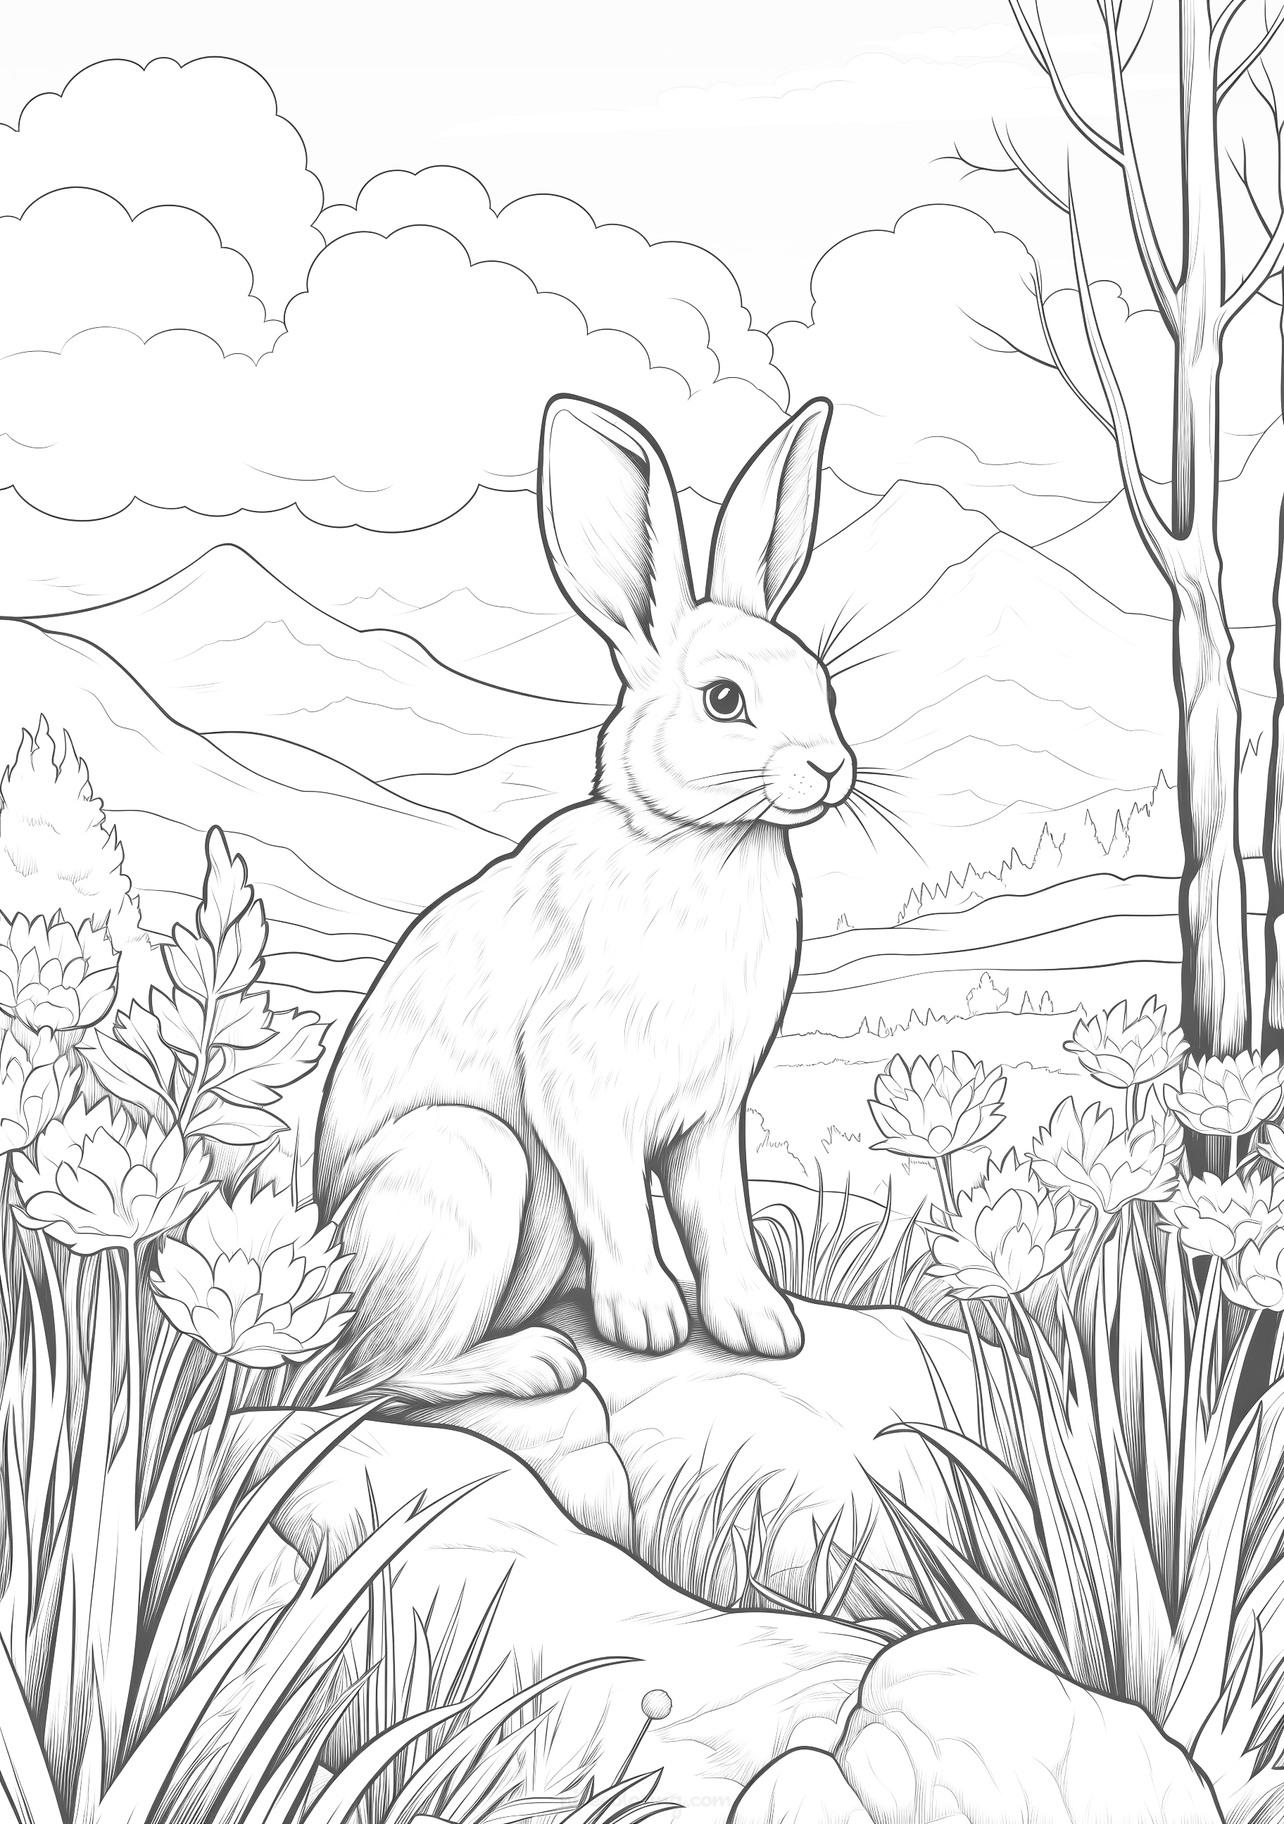 A serene rabbit sitting among flowers and nature ready for coloring